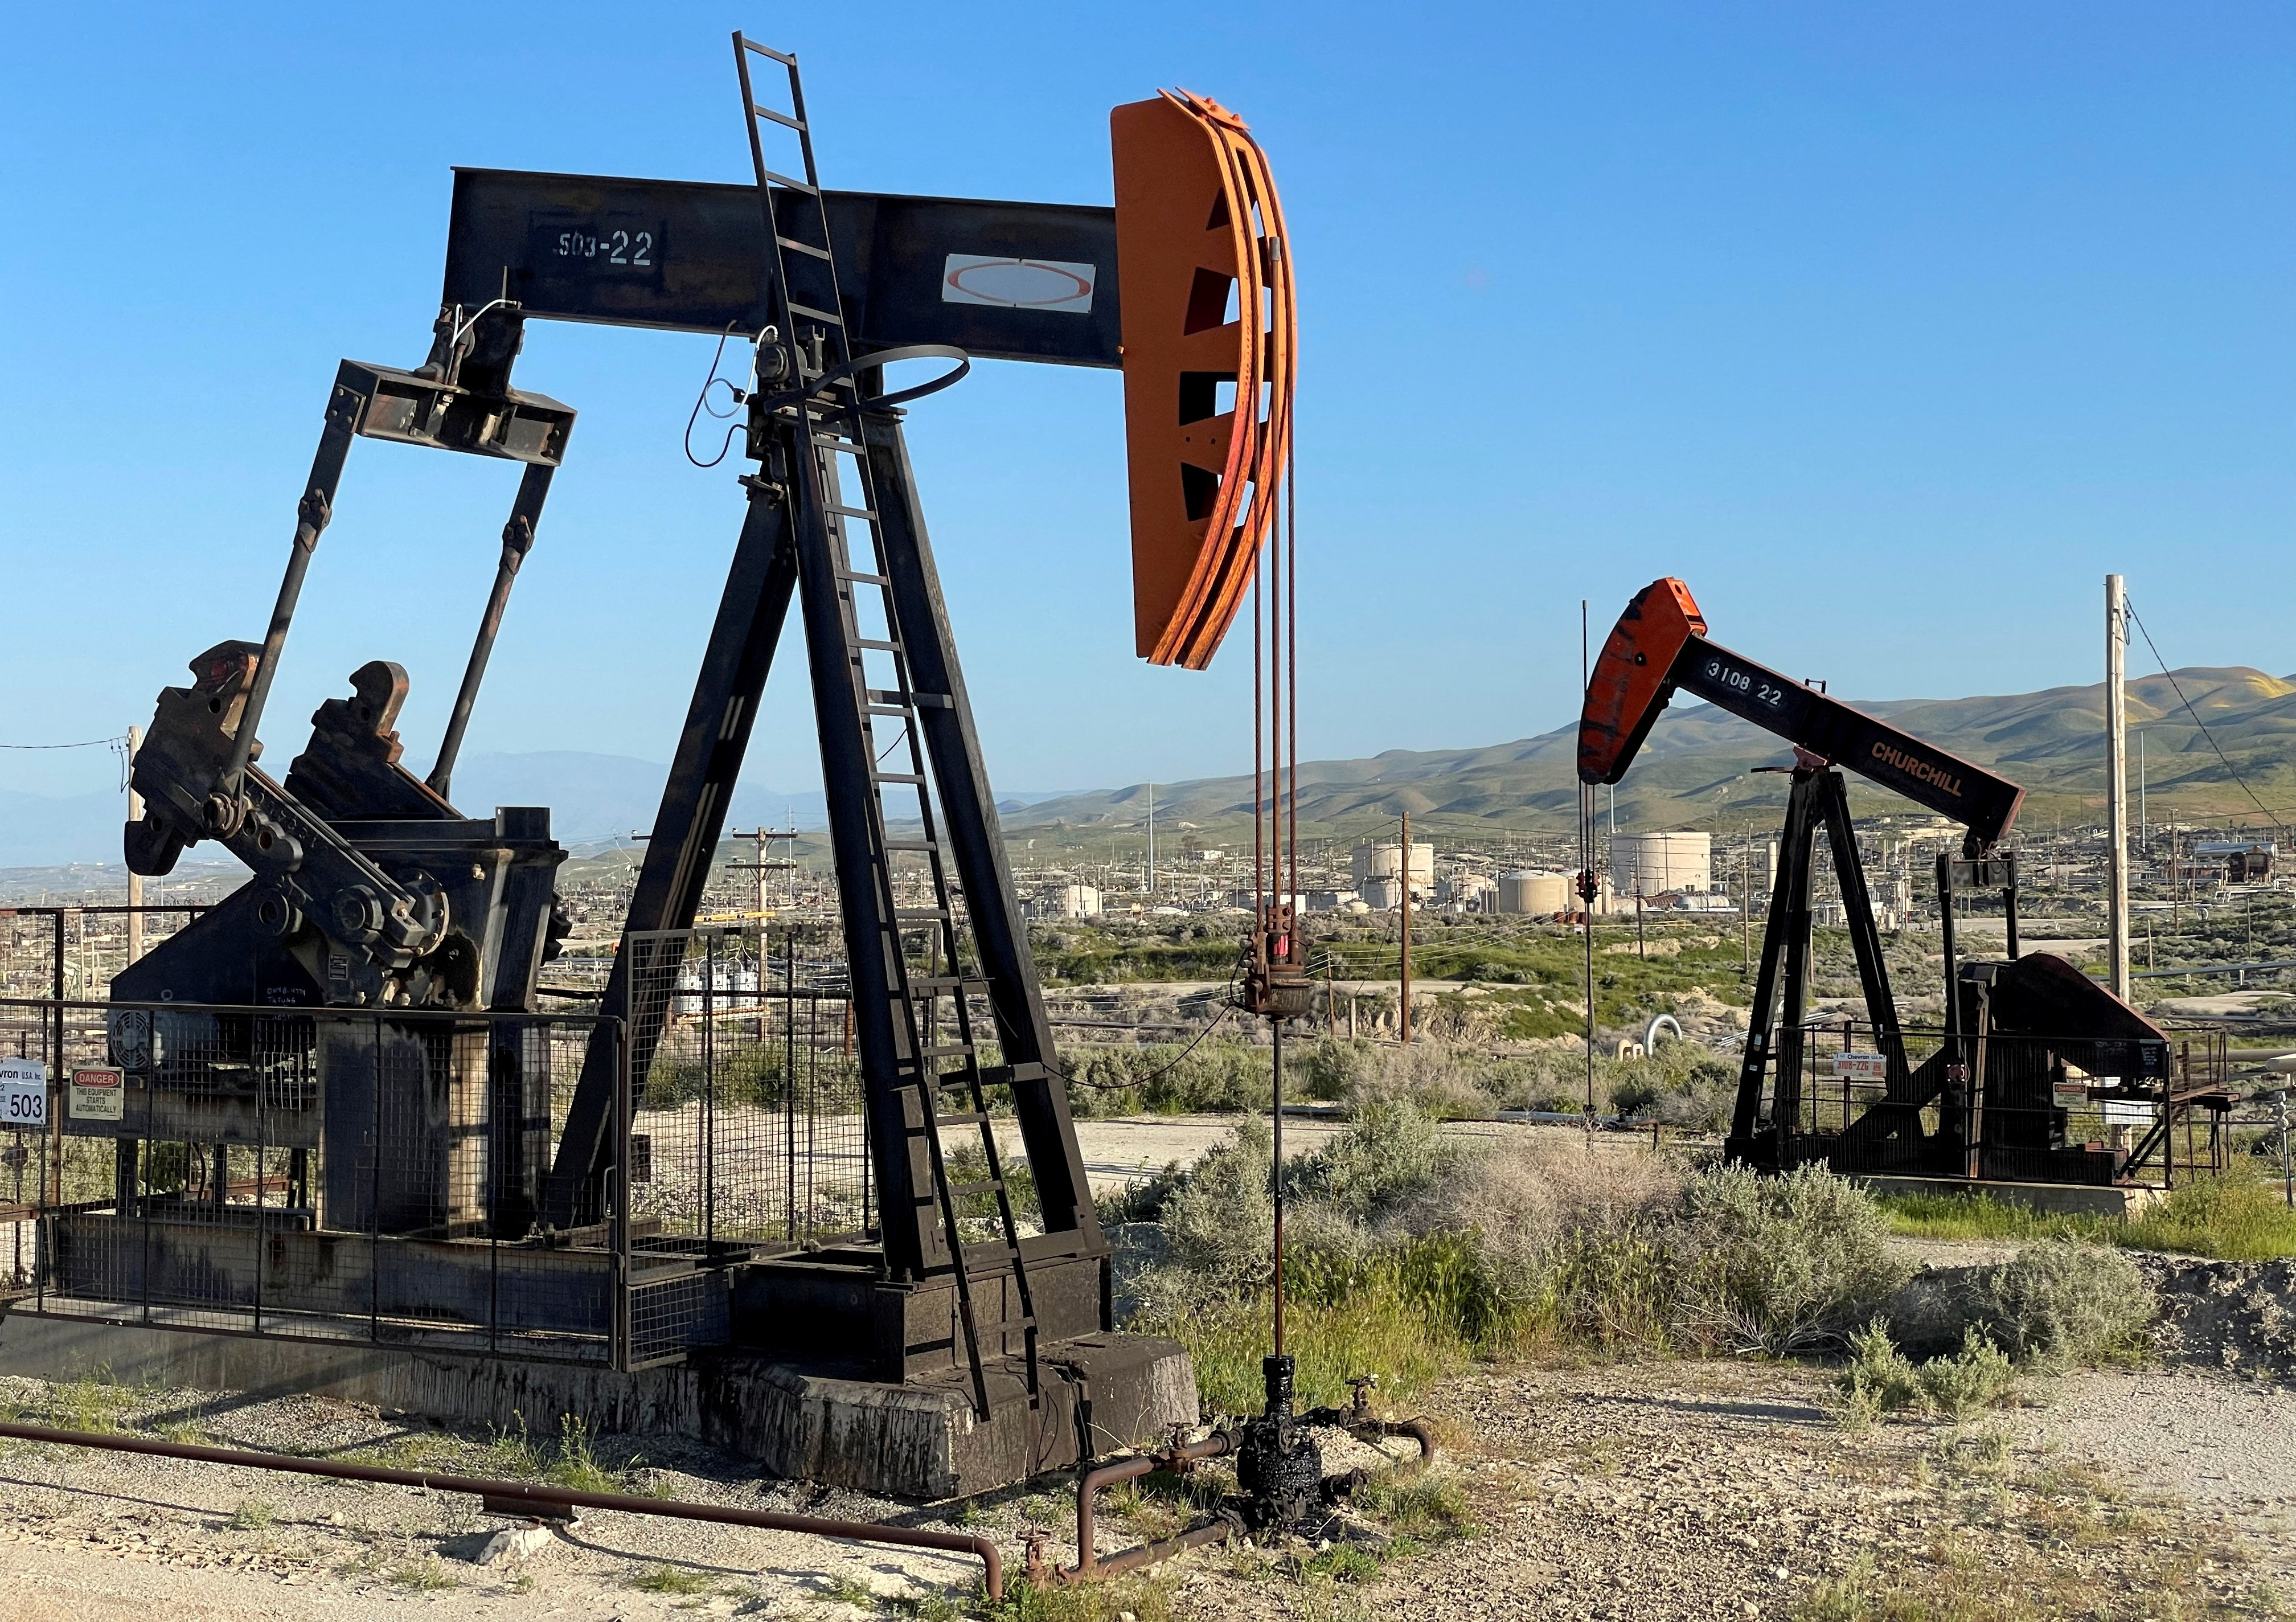 A general view of oil drilling equipment on federal land near Fellows, California